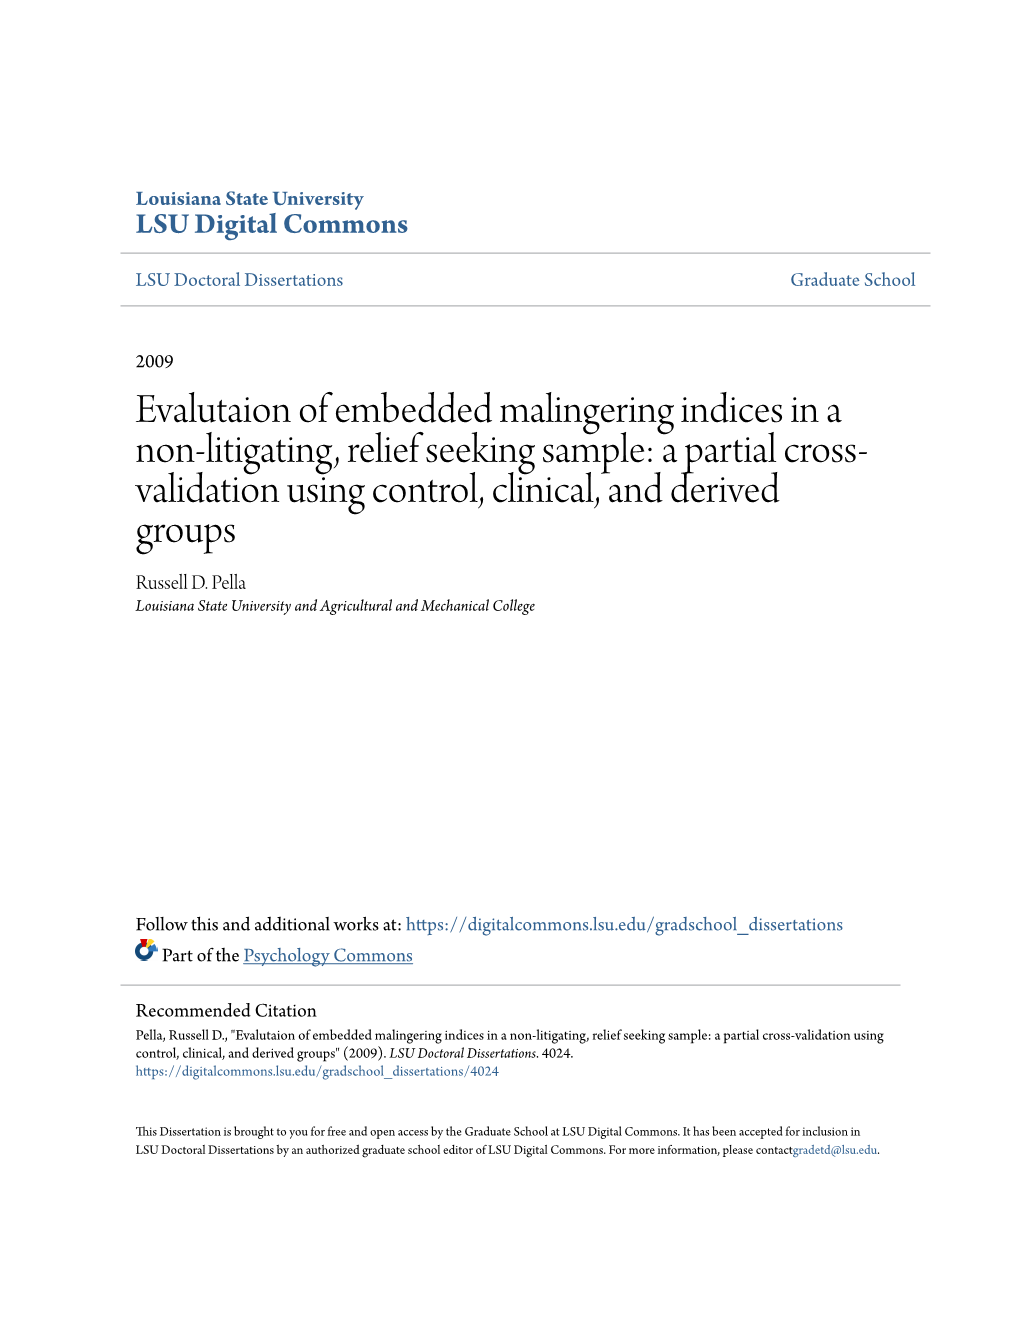 Evalutaion of Embedded Malingering Indices in a Non-Litigating, Relief Seeking Sample: a Partial Cross-Validation Using Control, Clinical, and Derived Groups" (2009)